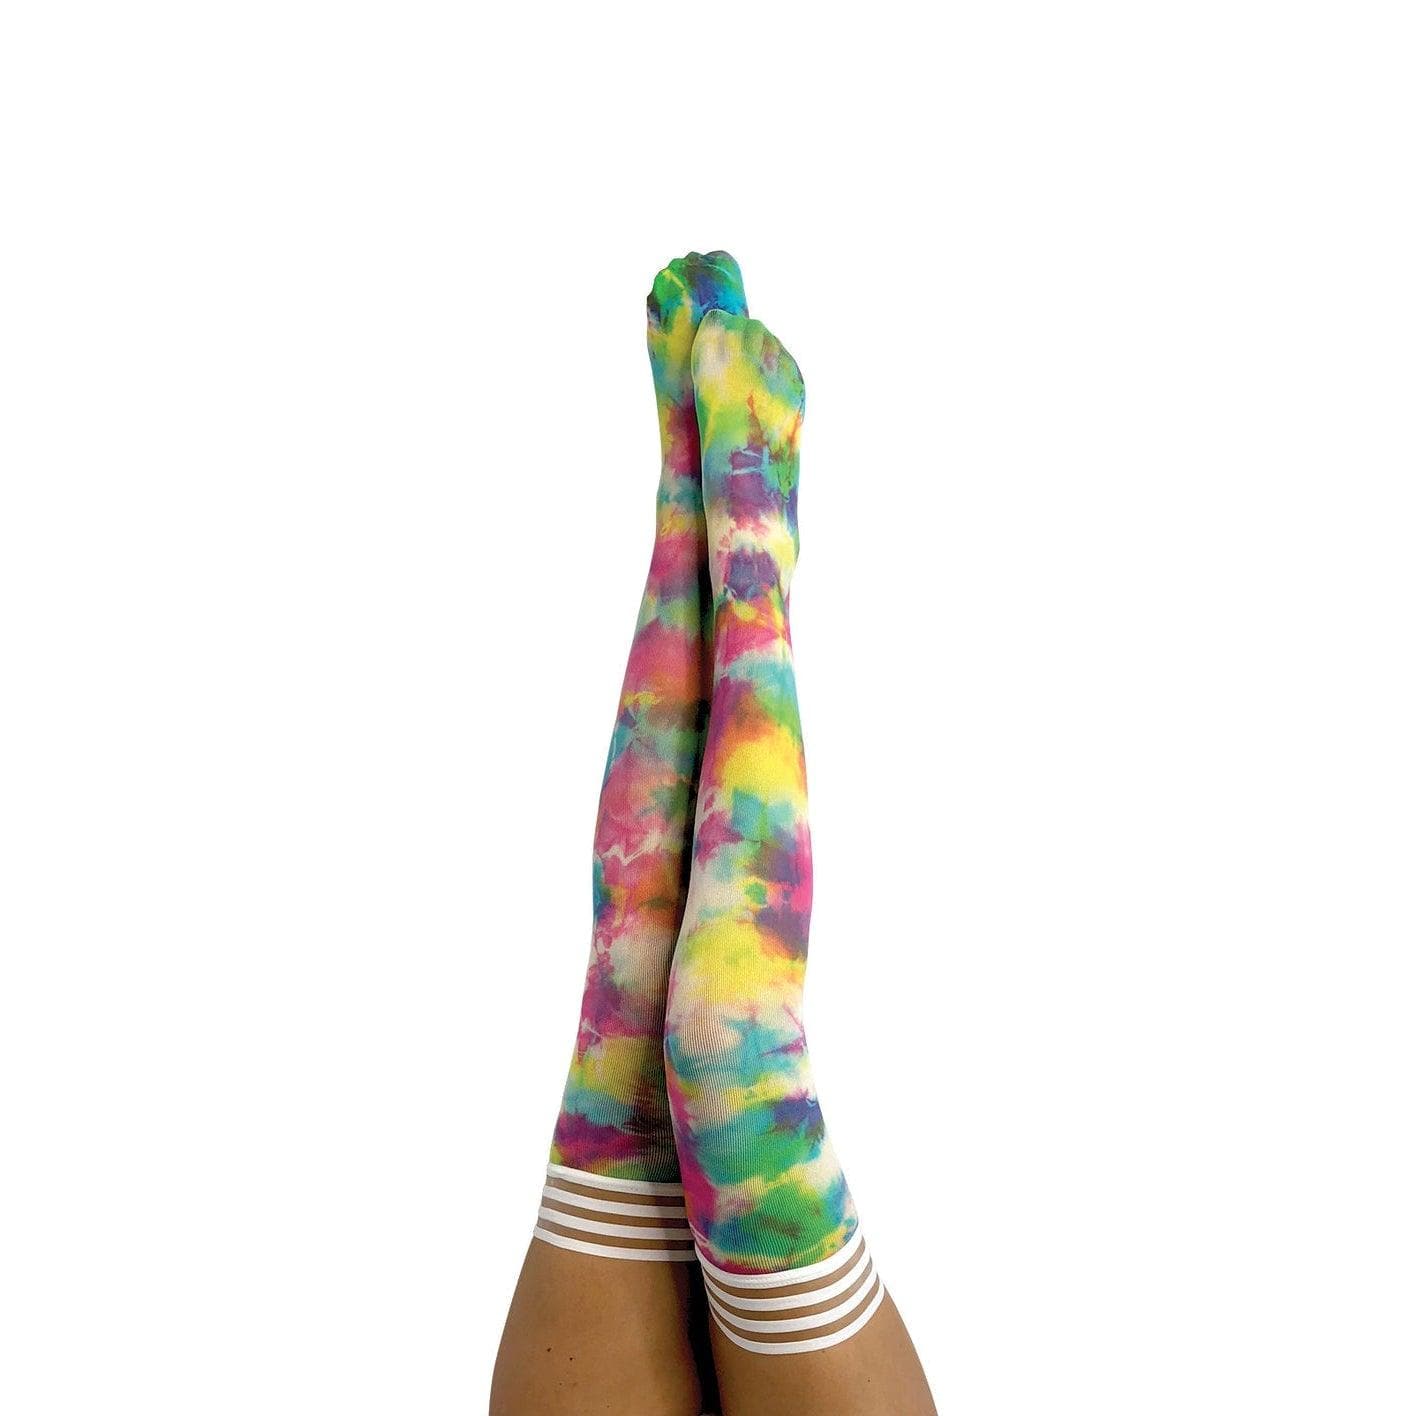 Kixies Gilly Rainbow Tie Dye Thigh Highs Multi Color - Romantic Blessings